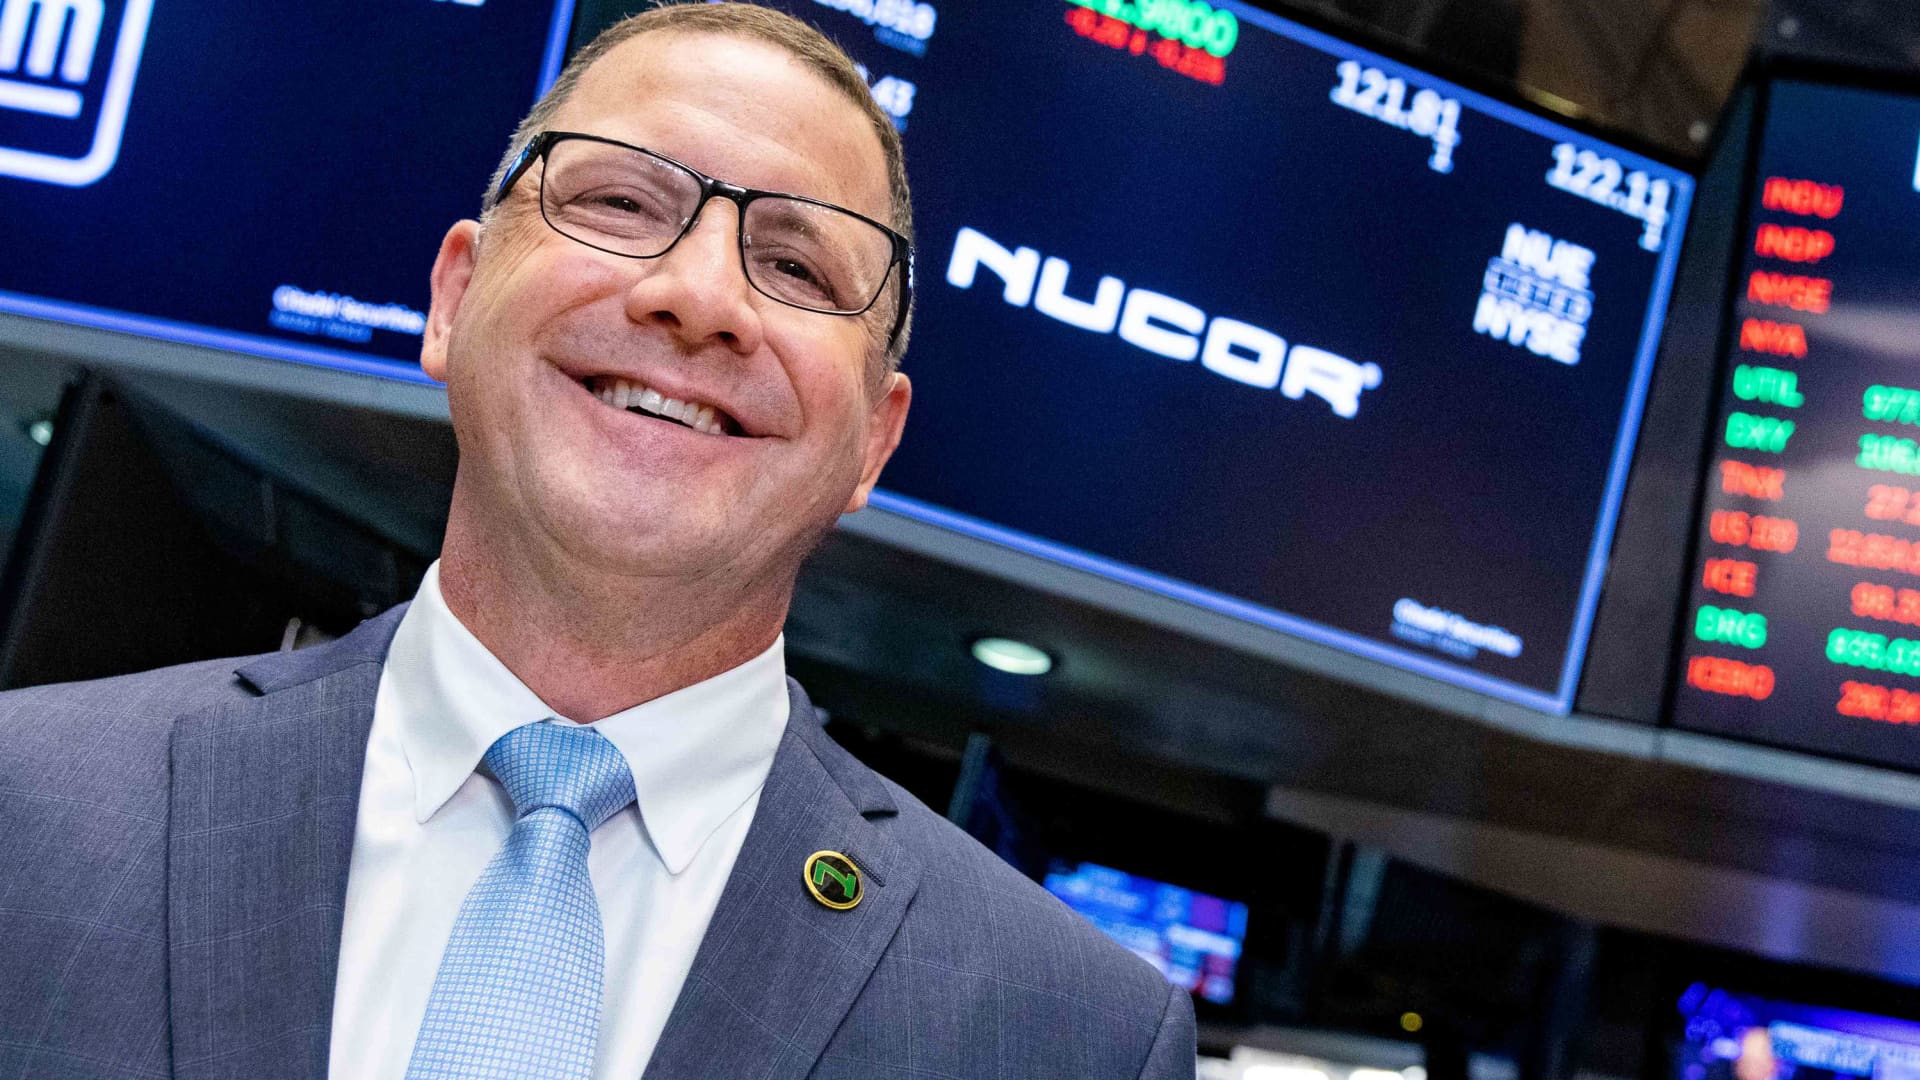 Despite earnings miss, Nucor CEO is confident this year will be a success - CNBC